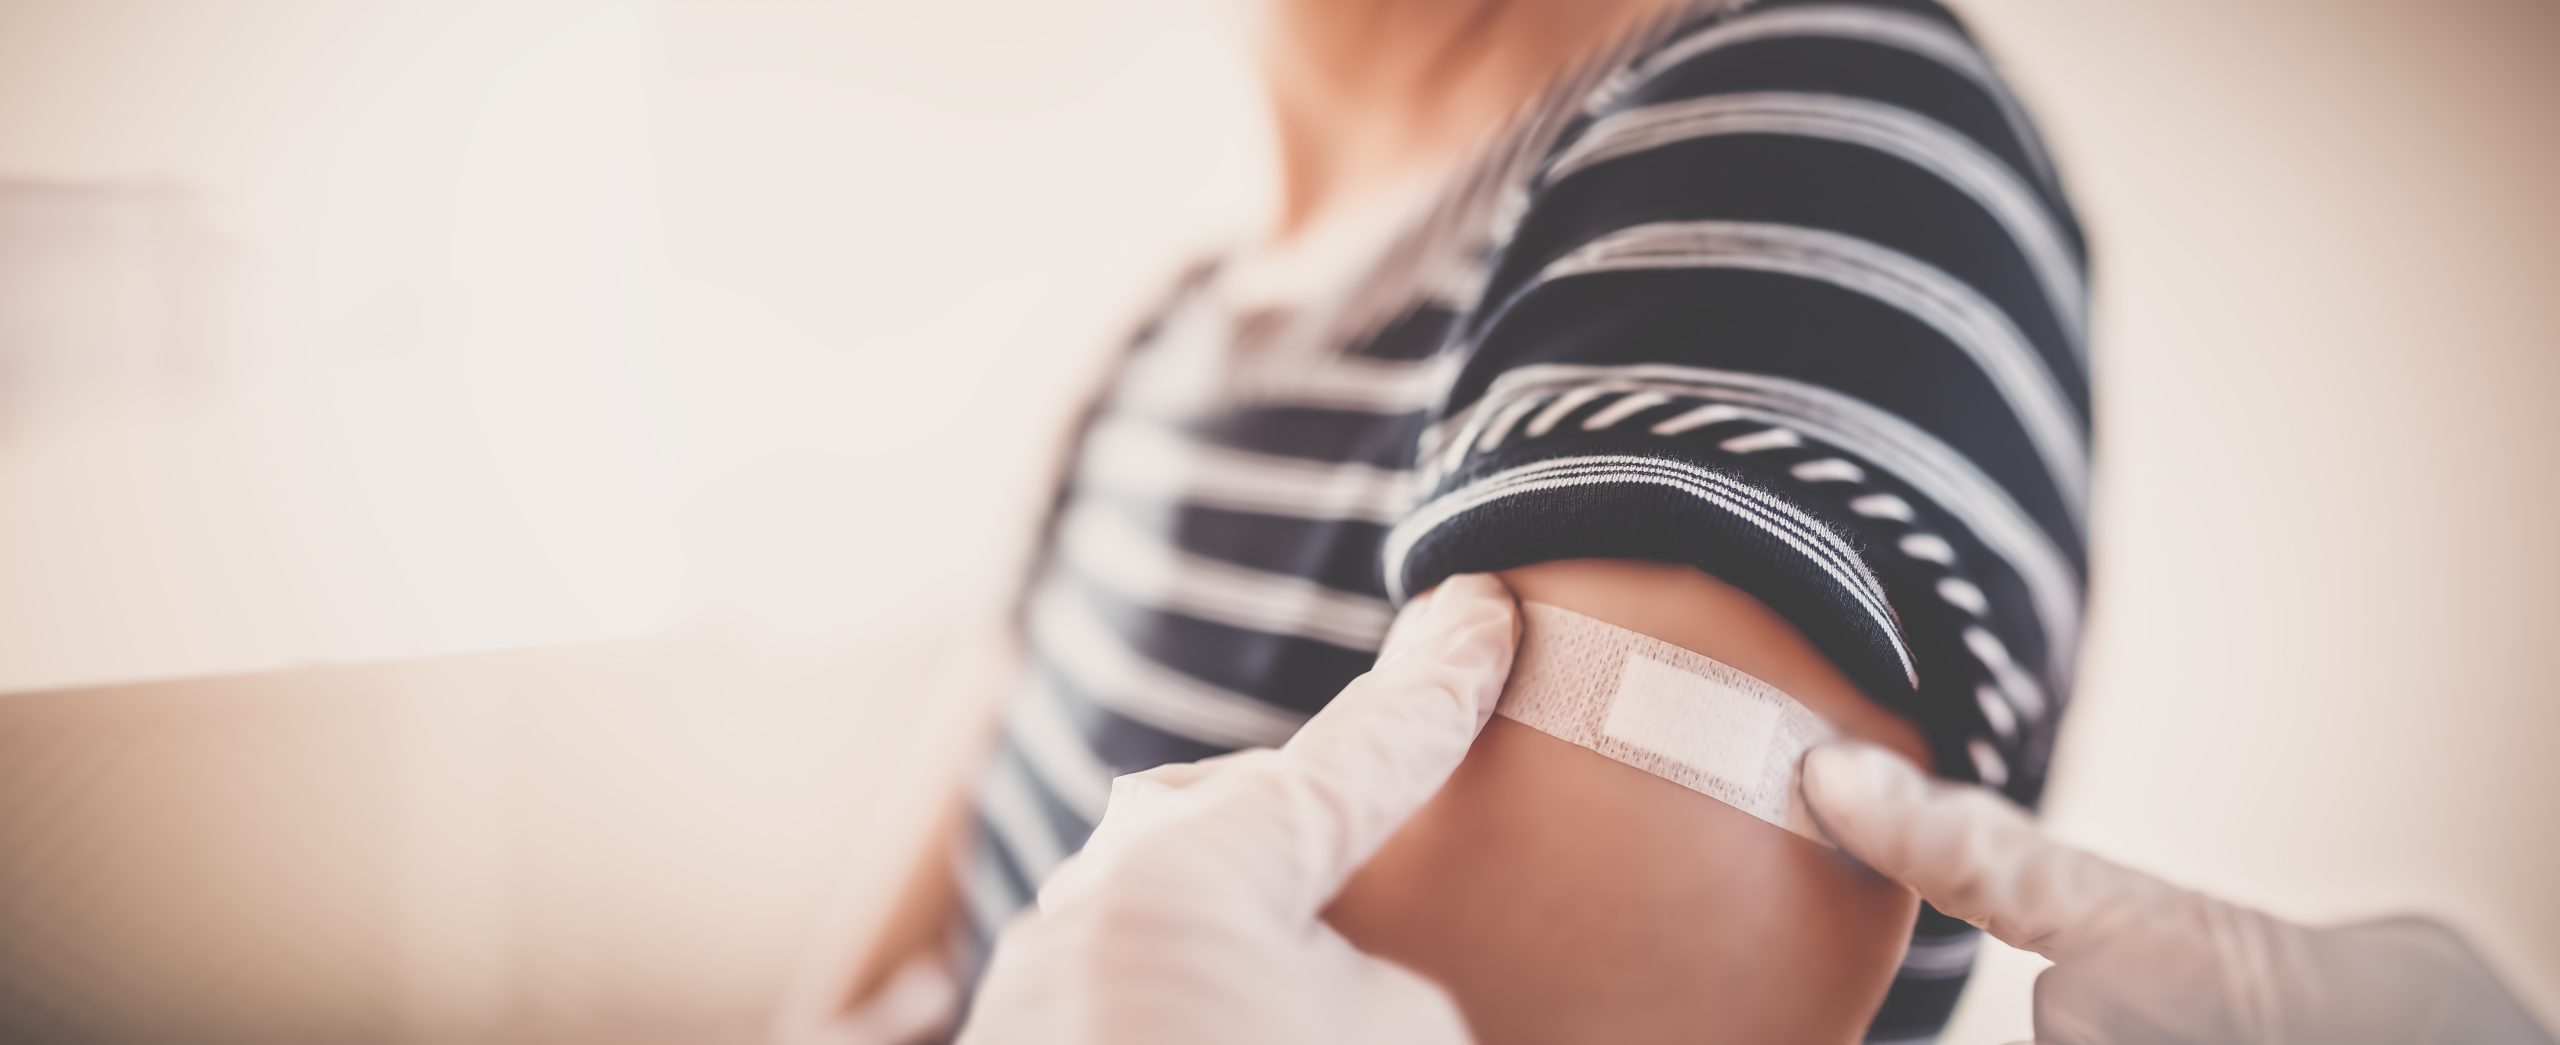 The unexpected benefits of workplace flu vaccination programs